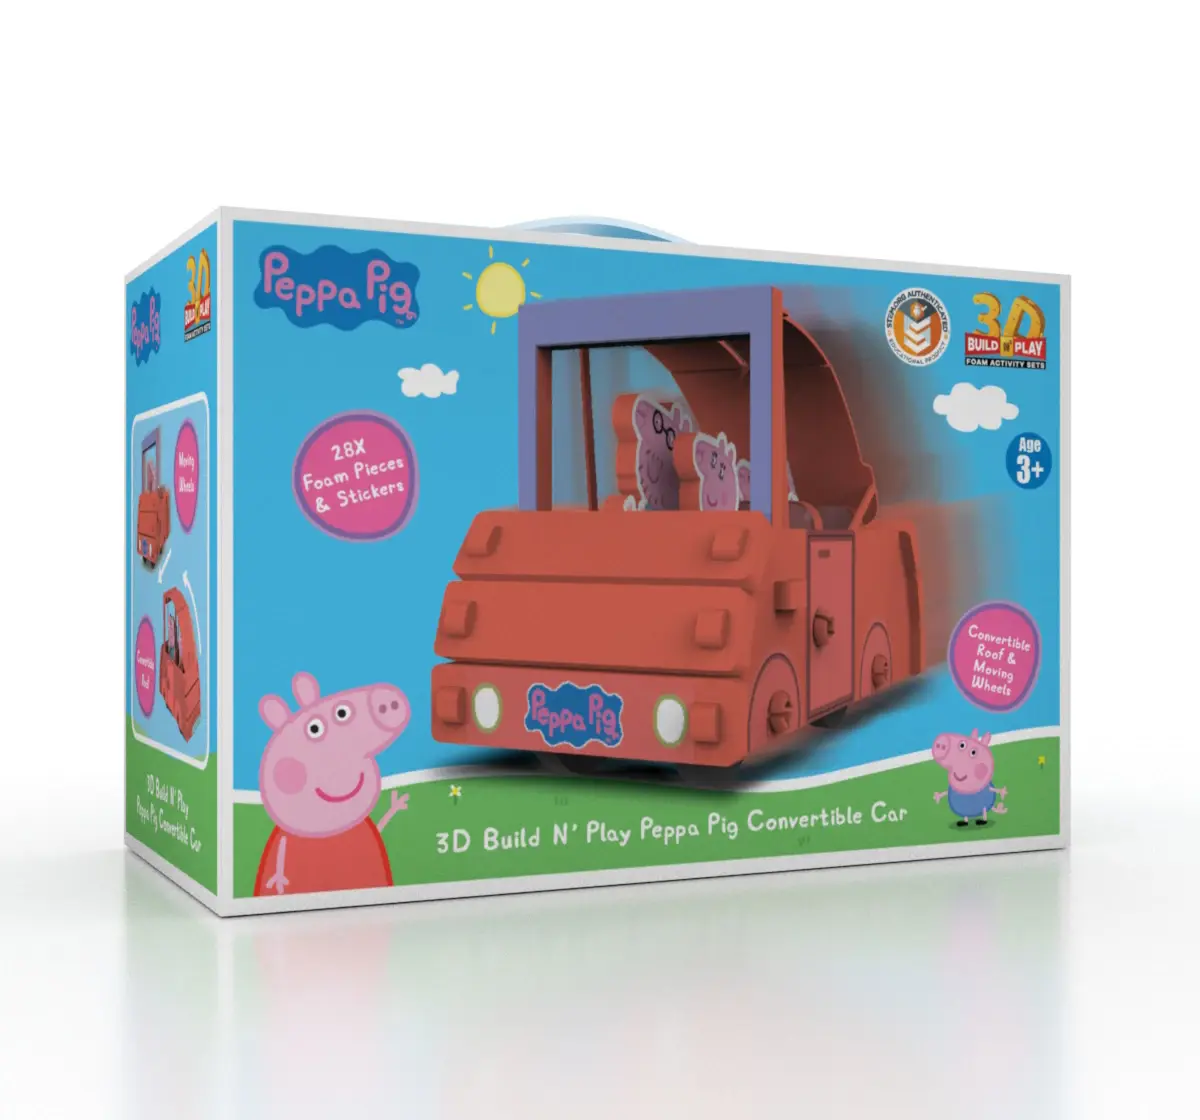 Li'l Wizards 3D Build N' Play Peppa Pig Convertible Car For Kids of Age 3Y+, Multicolour